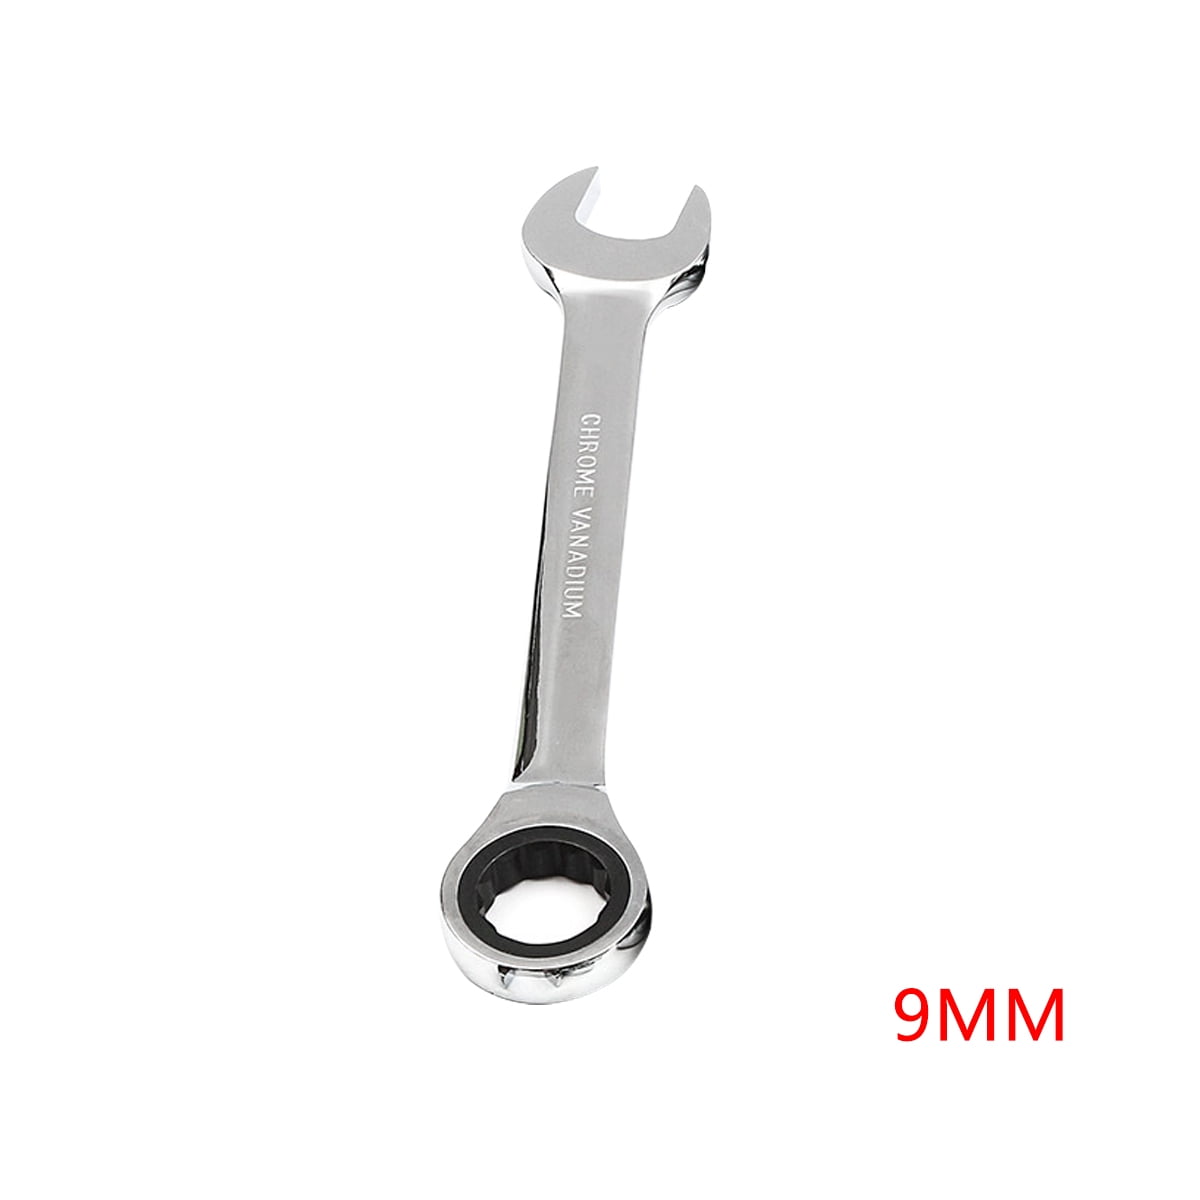 Bike Cone Spanner Metric Wrench Chrome Finish Fine Tooth Hand Spanner Tool 